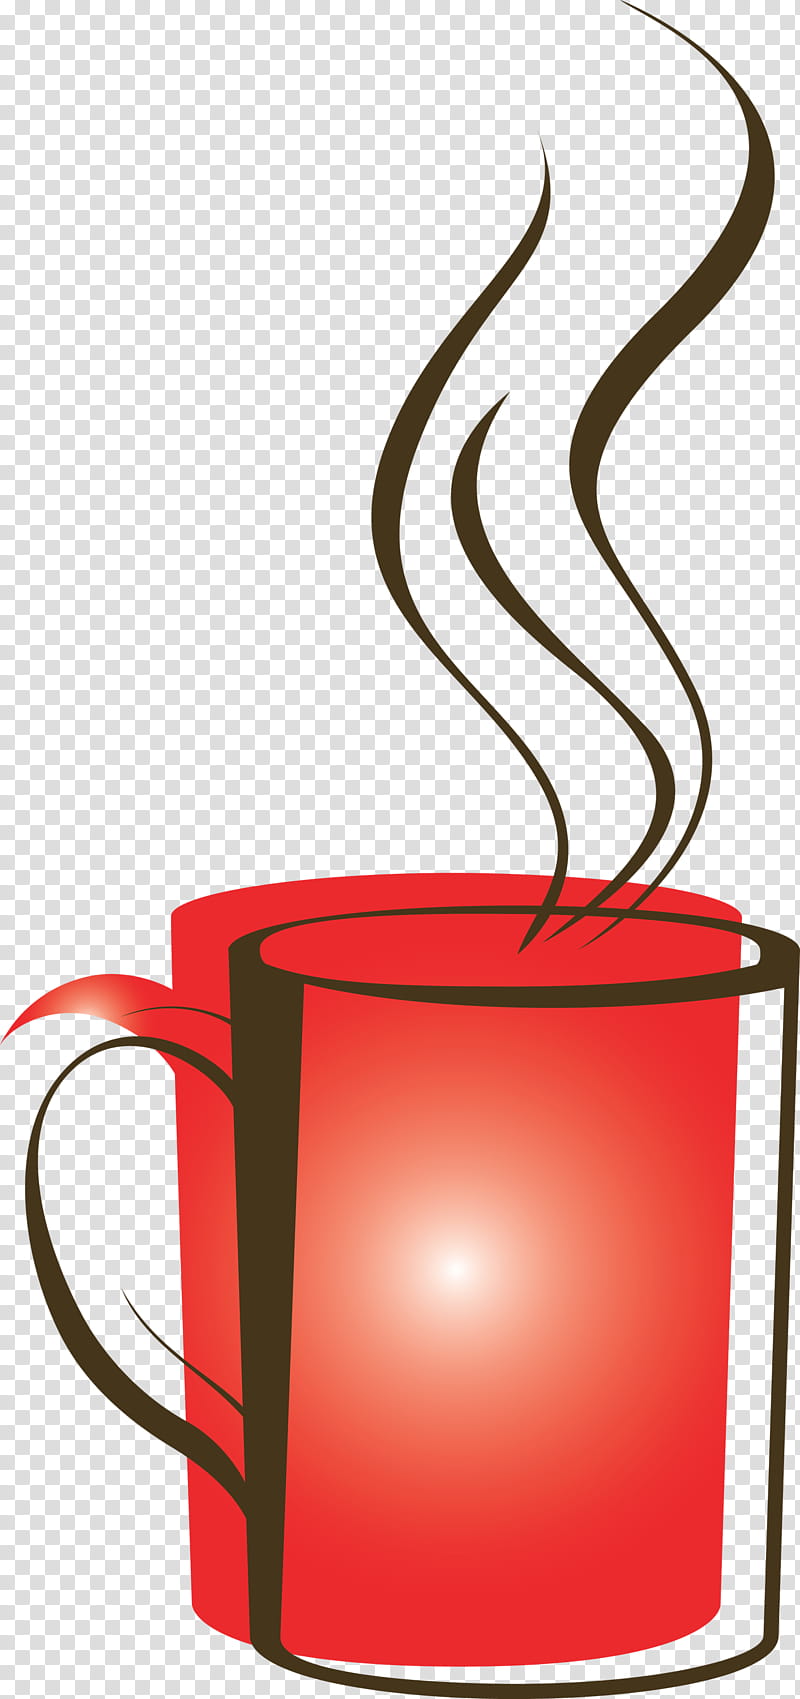 coffee, Red, Cup, Drinkware, Line, Material Property, Tableware transparent background PNG clipart